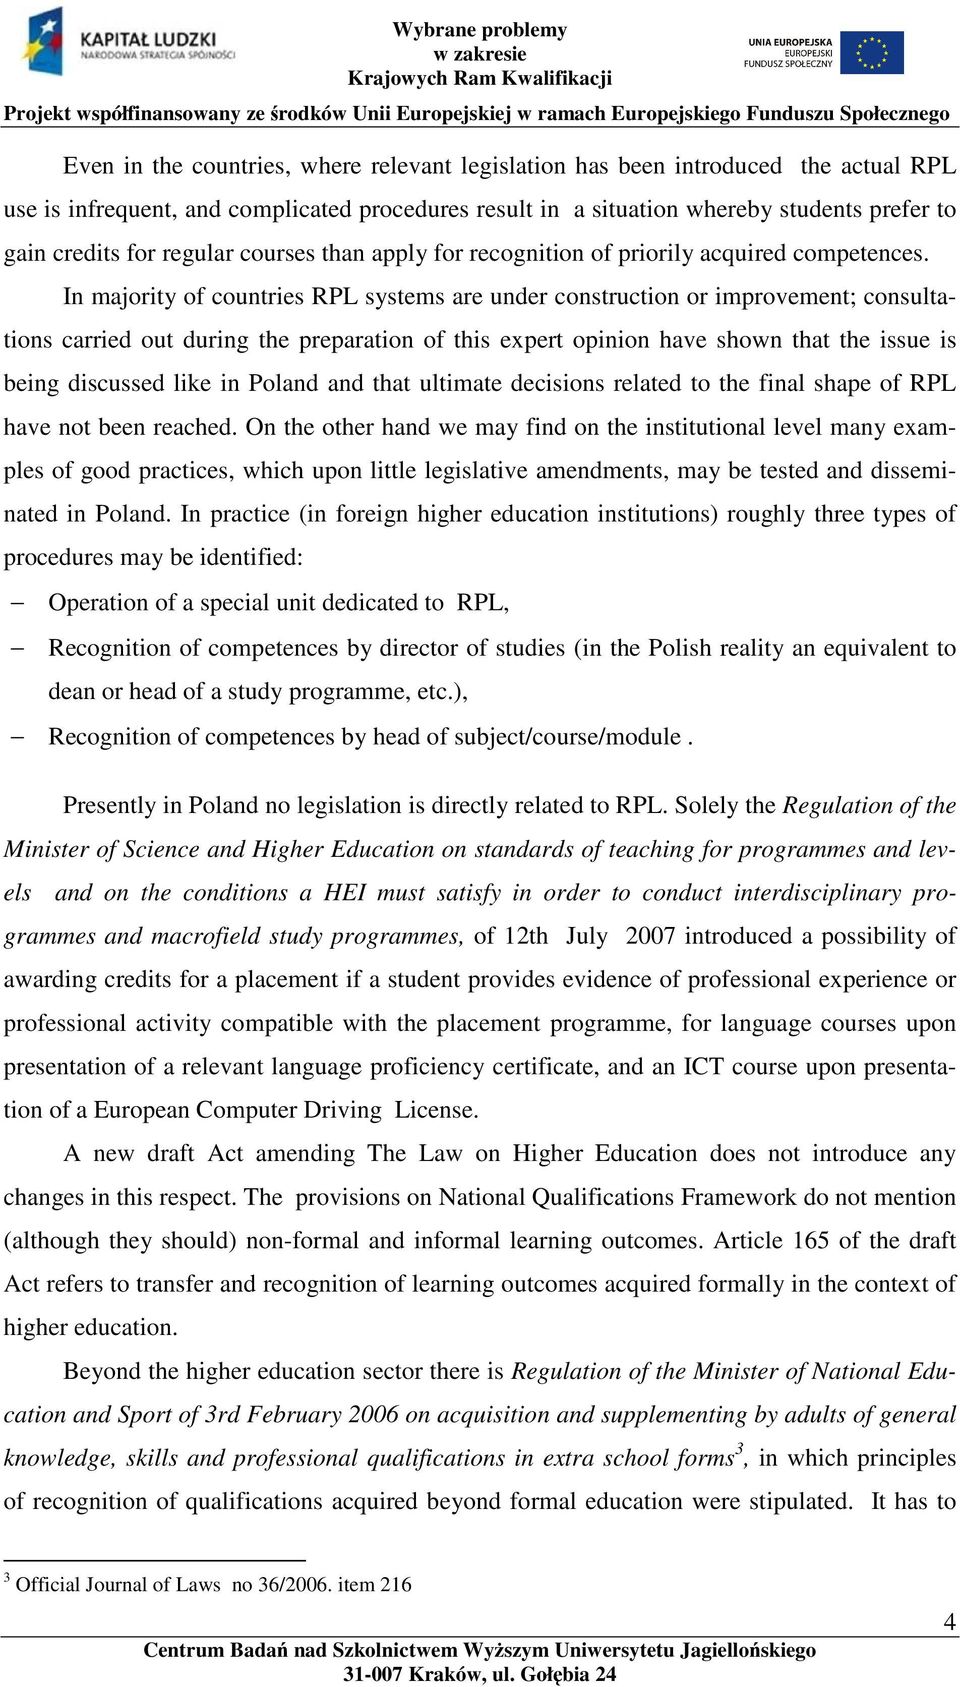 In majority of countries RPL systems are under construction or improvement; consultations carried out during the preparation of this expert opinion have shown that the issue is being discussed like